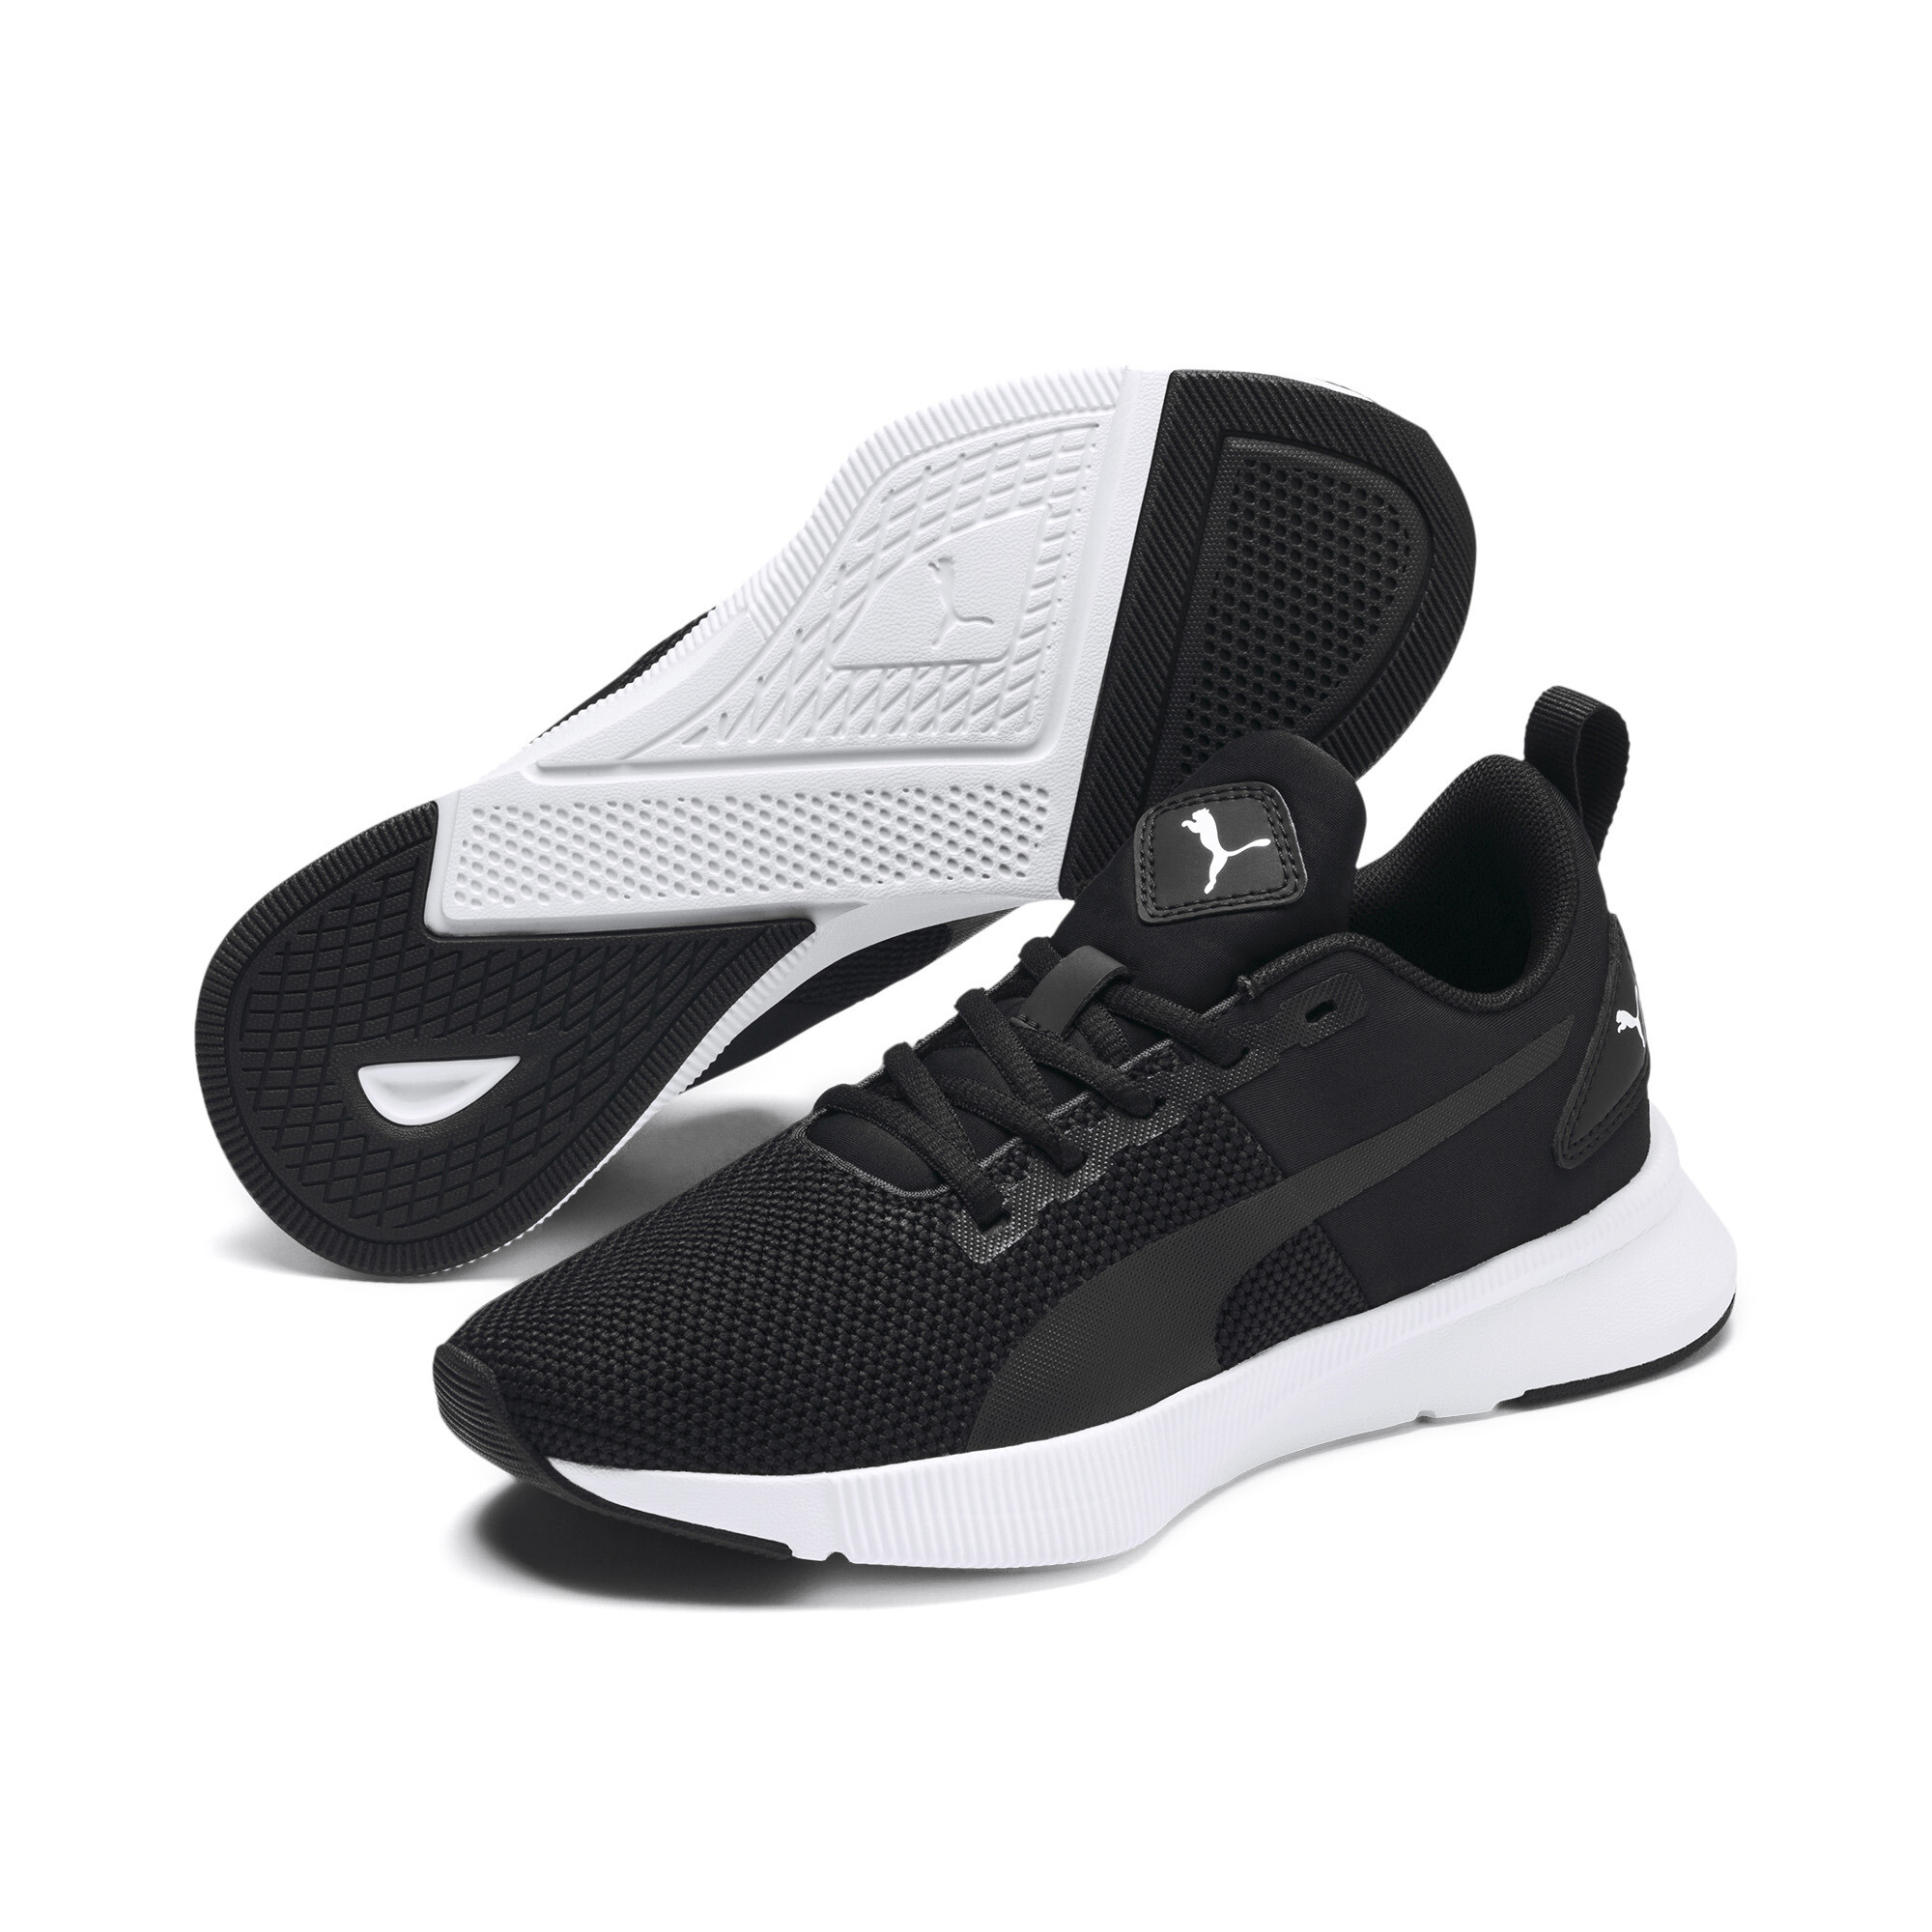 PUMA Flyer Runner Youth Trainers In 10 - Black, Size EU 36